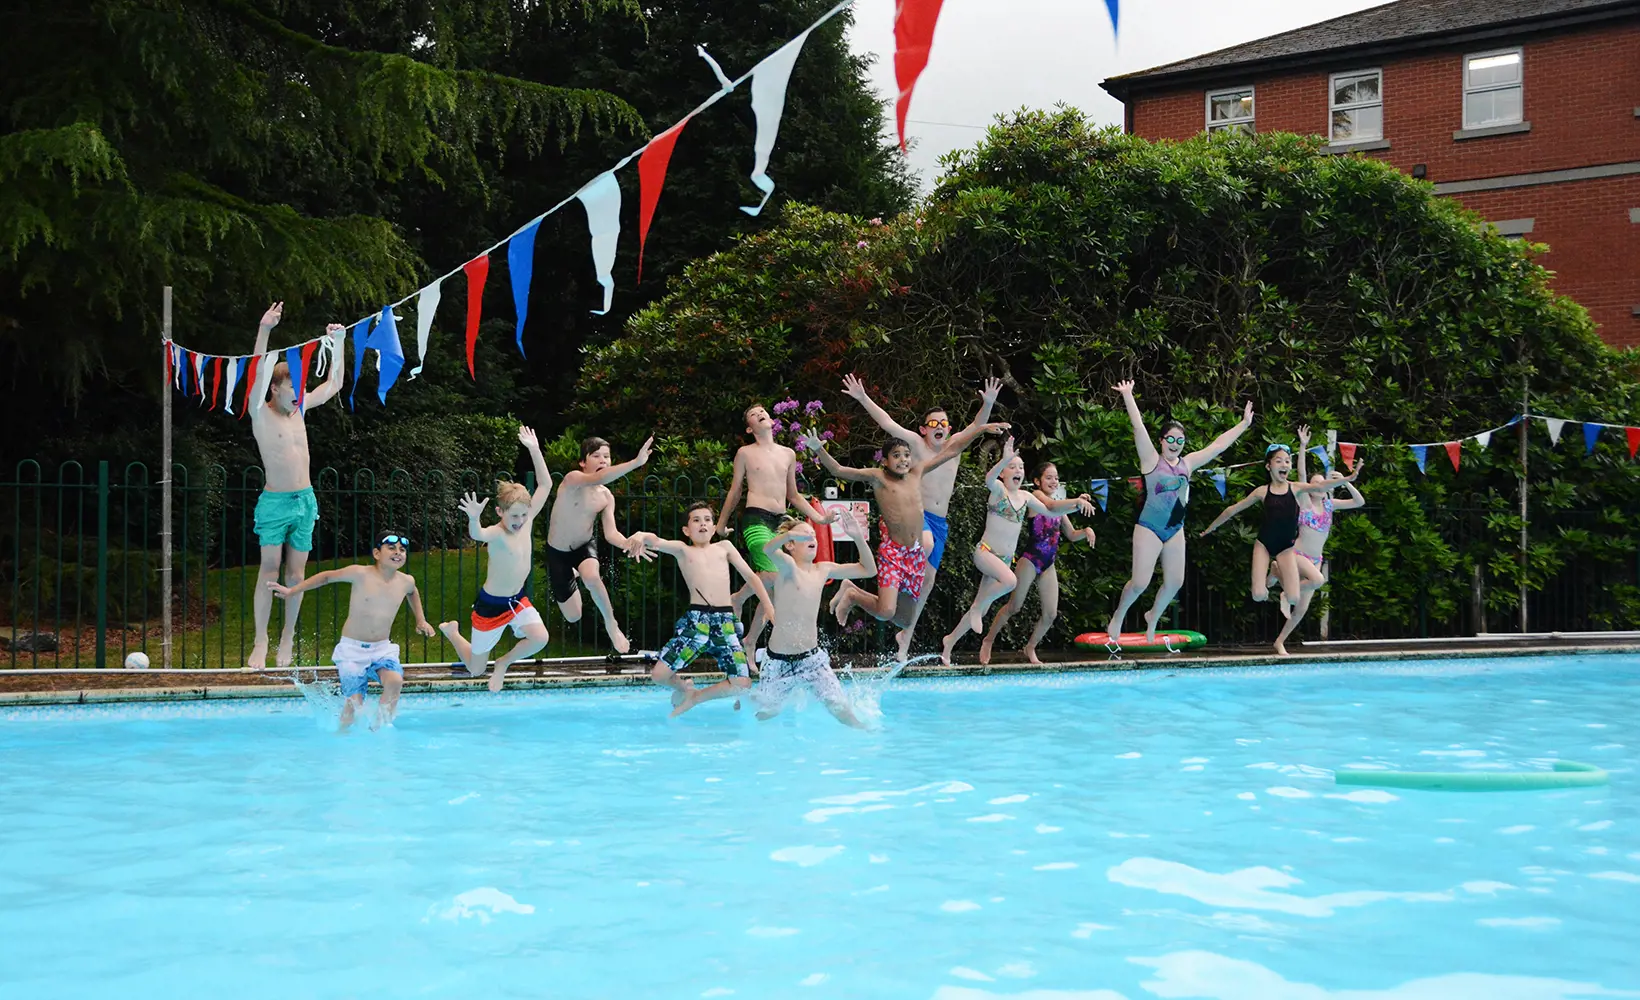 Students at The Ryleys School, Cheshire, jumping into the swimming pool